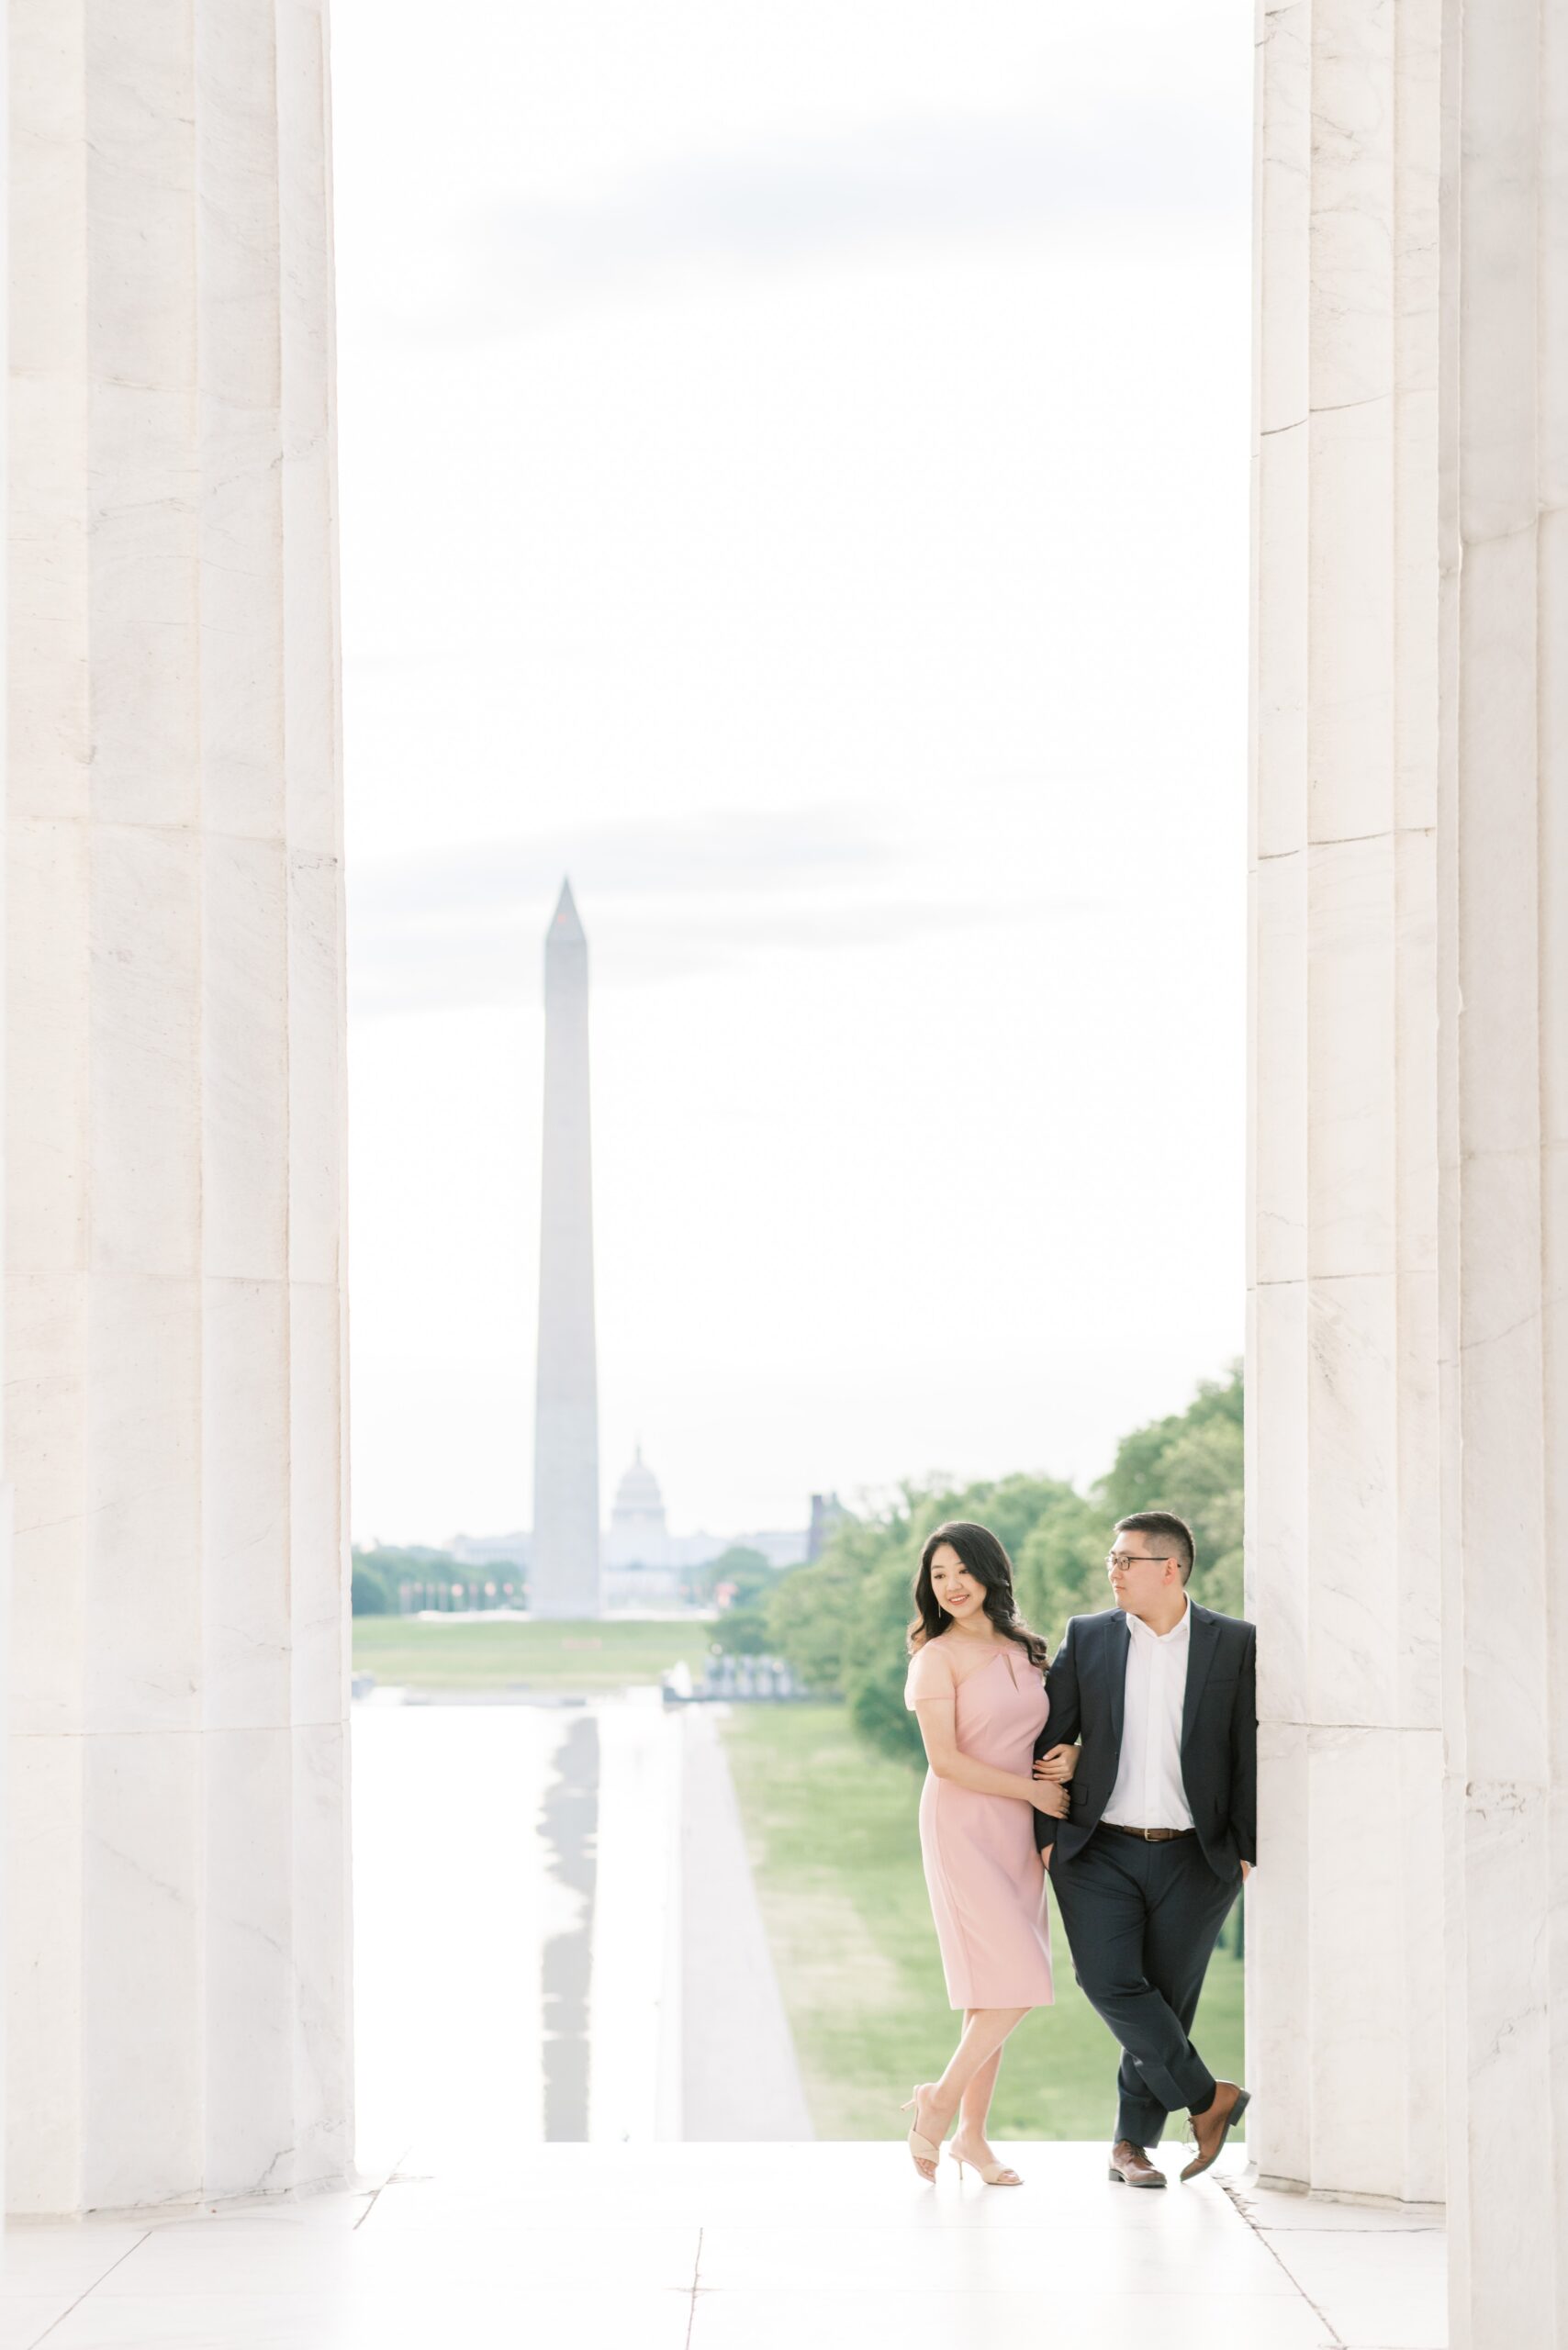 A quiet sunrise engagement photo session at the Lincoln Memorial and Reflecting Pool in Washington, DC.